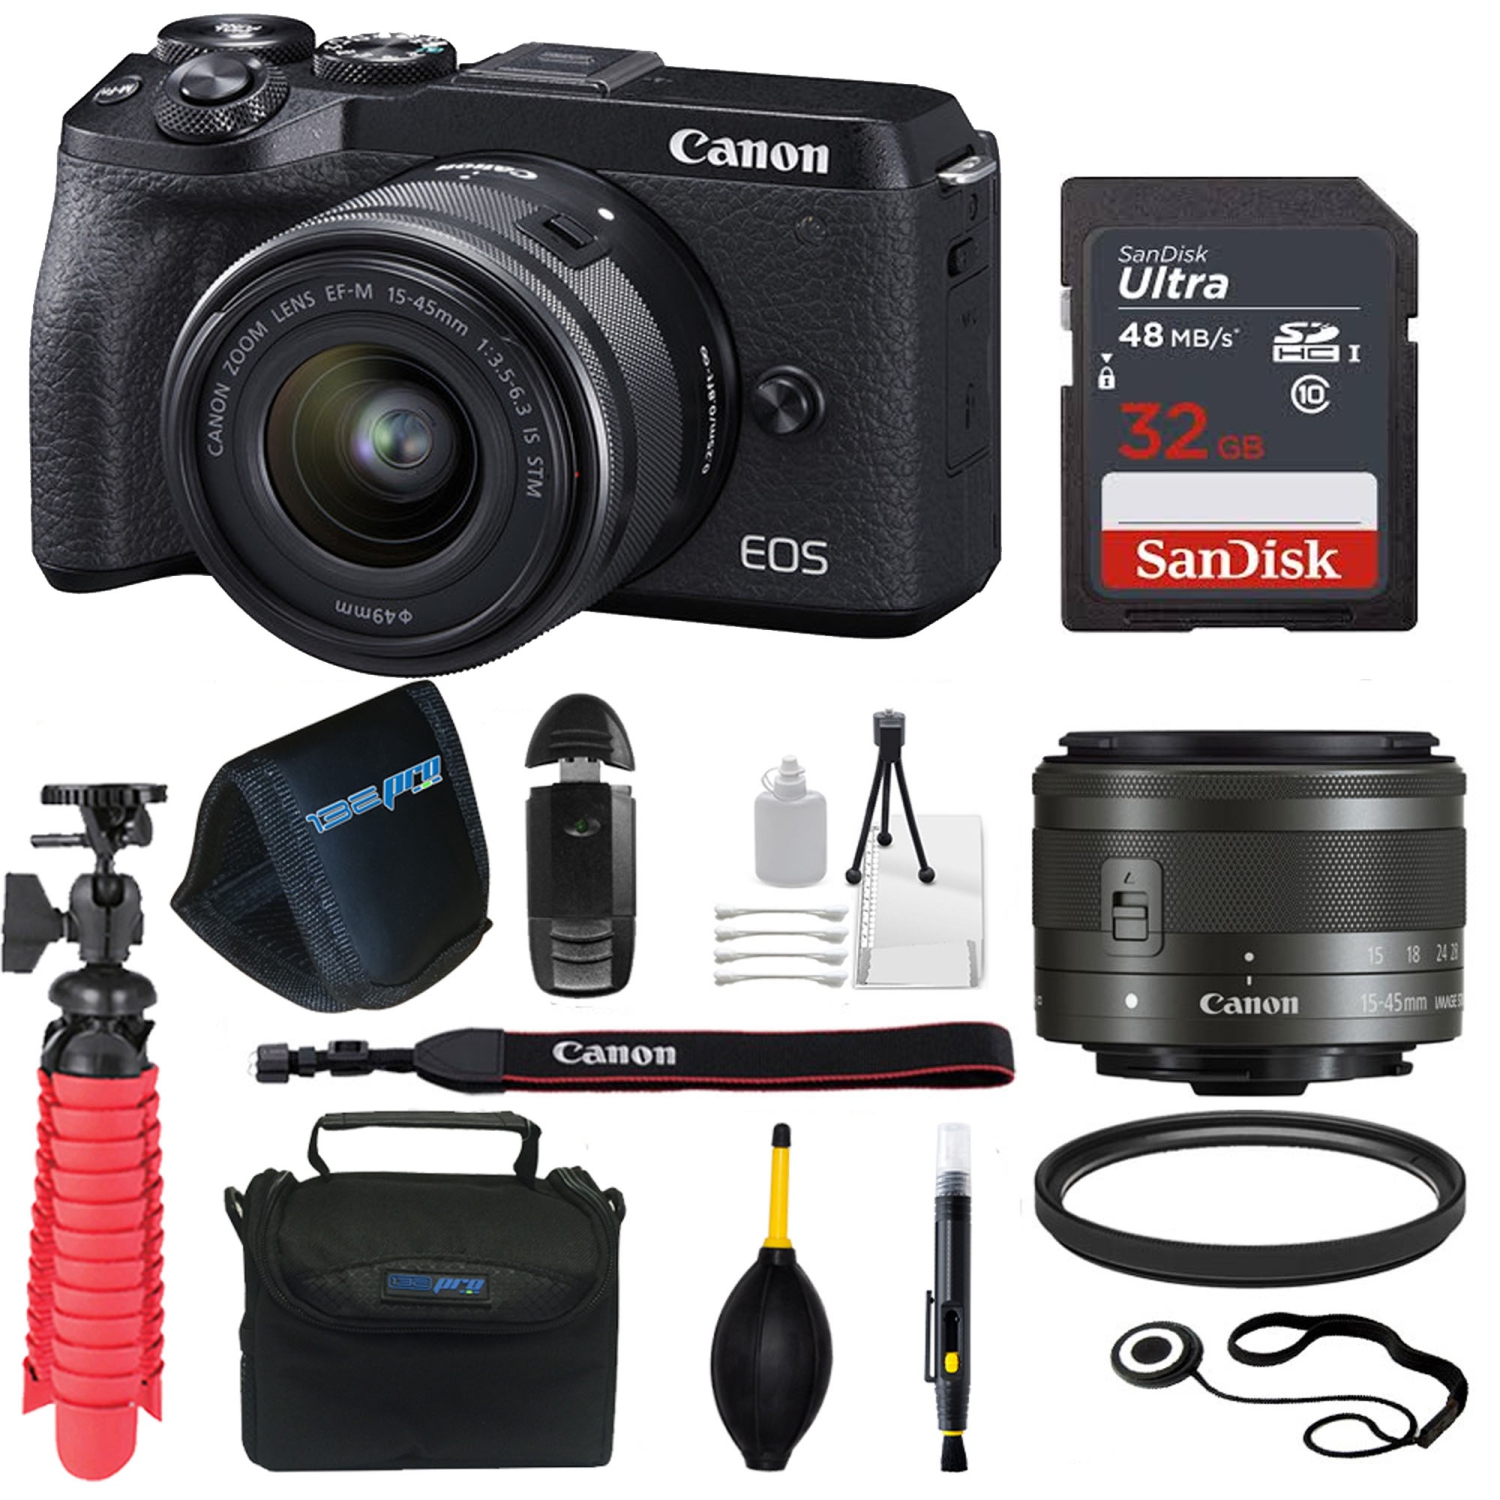 Canon EOS M6 Mark II Mirrorless Digital Camera with 15-45mm Lens WITH Sandisk 32GB Starter Package - US Version w/ Seller Warranty